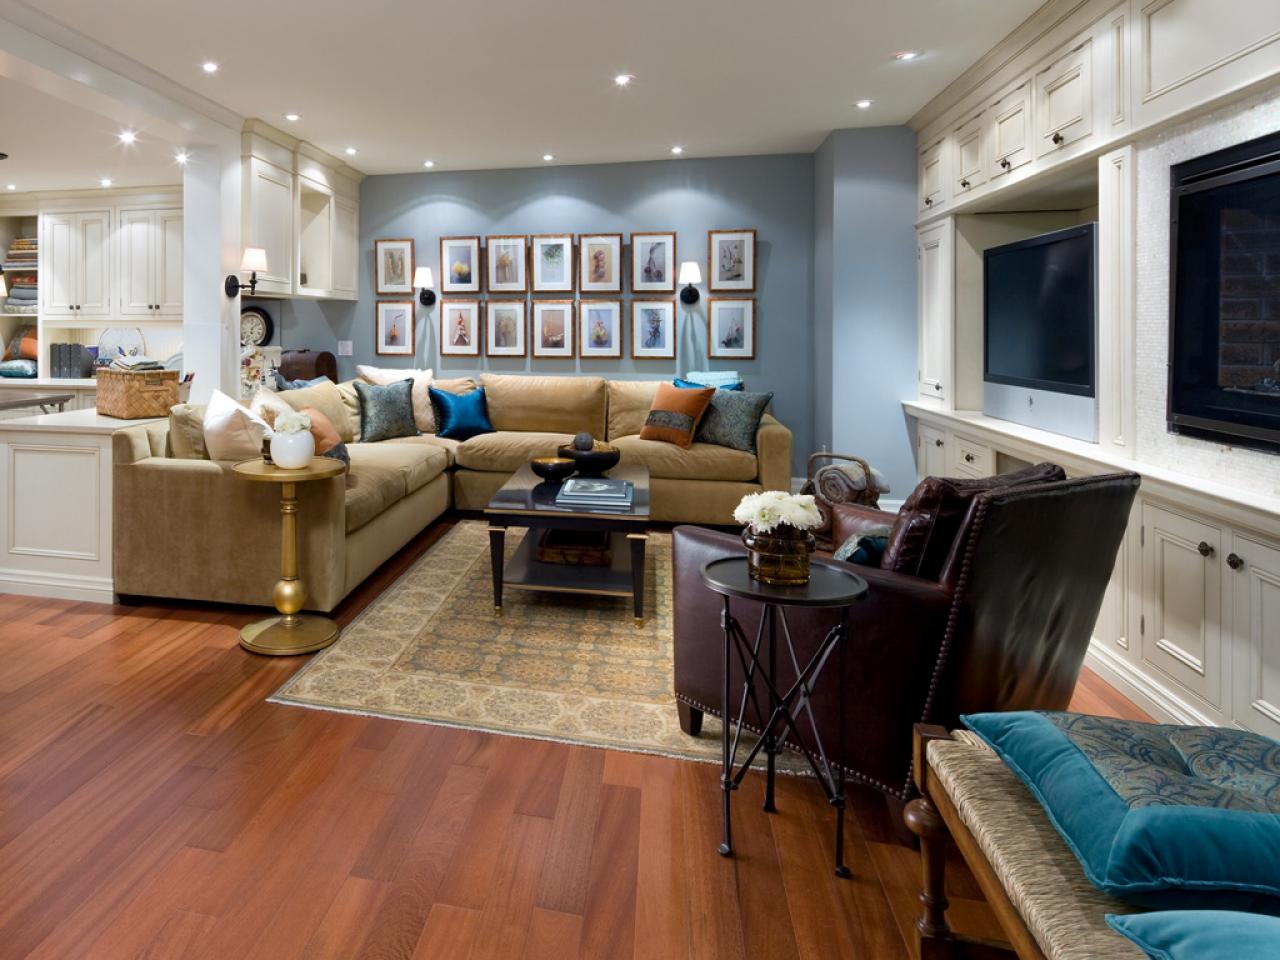 Finishing Ideas Wooden Wonderful Basement Finishing Ideas Decorated With Wooden Flooring And Blue Wall Accent Color And Cream Fabric Sofa Finished In Traditional Style Basement Basement Finishing Ideas Leading To Stunning Results